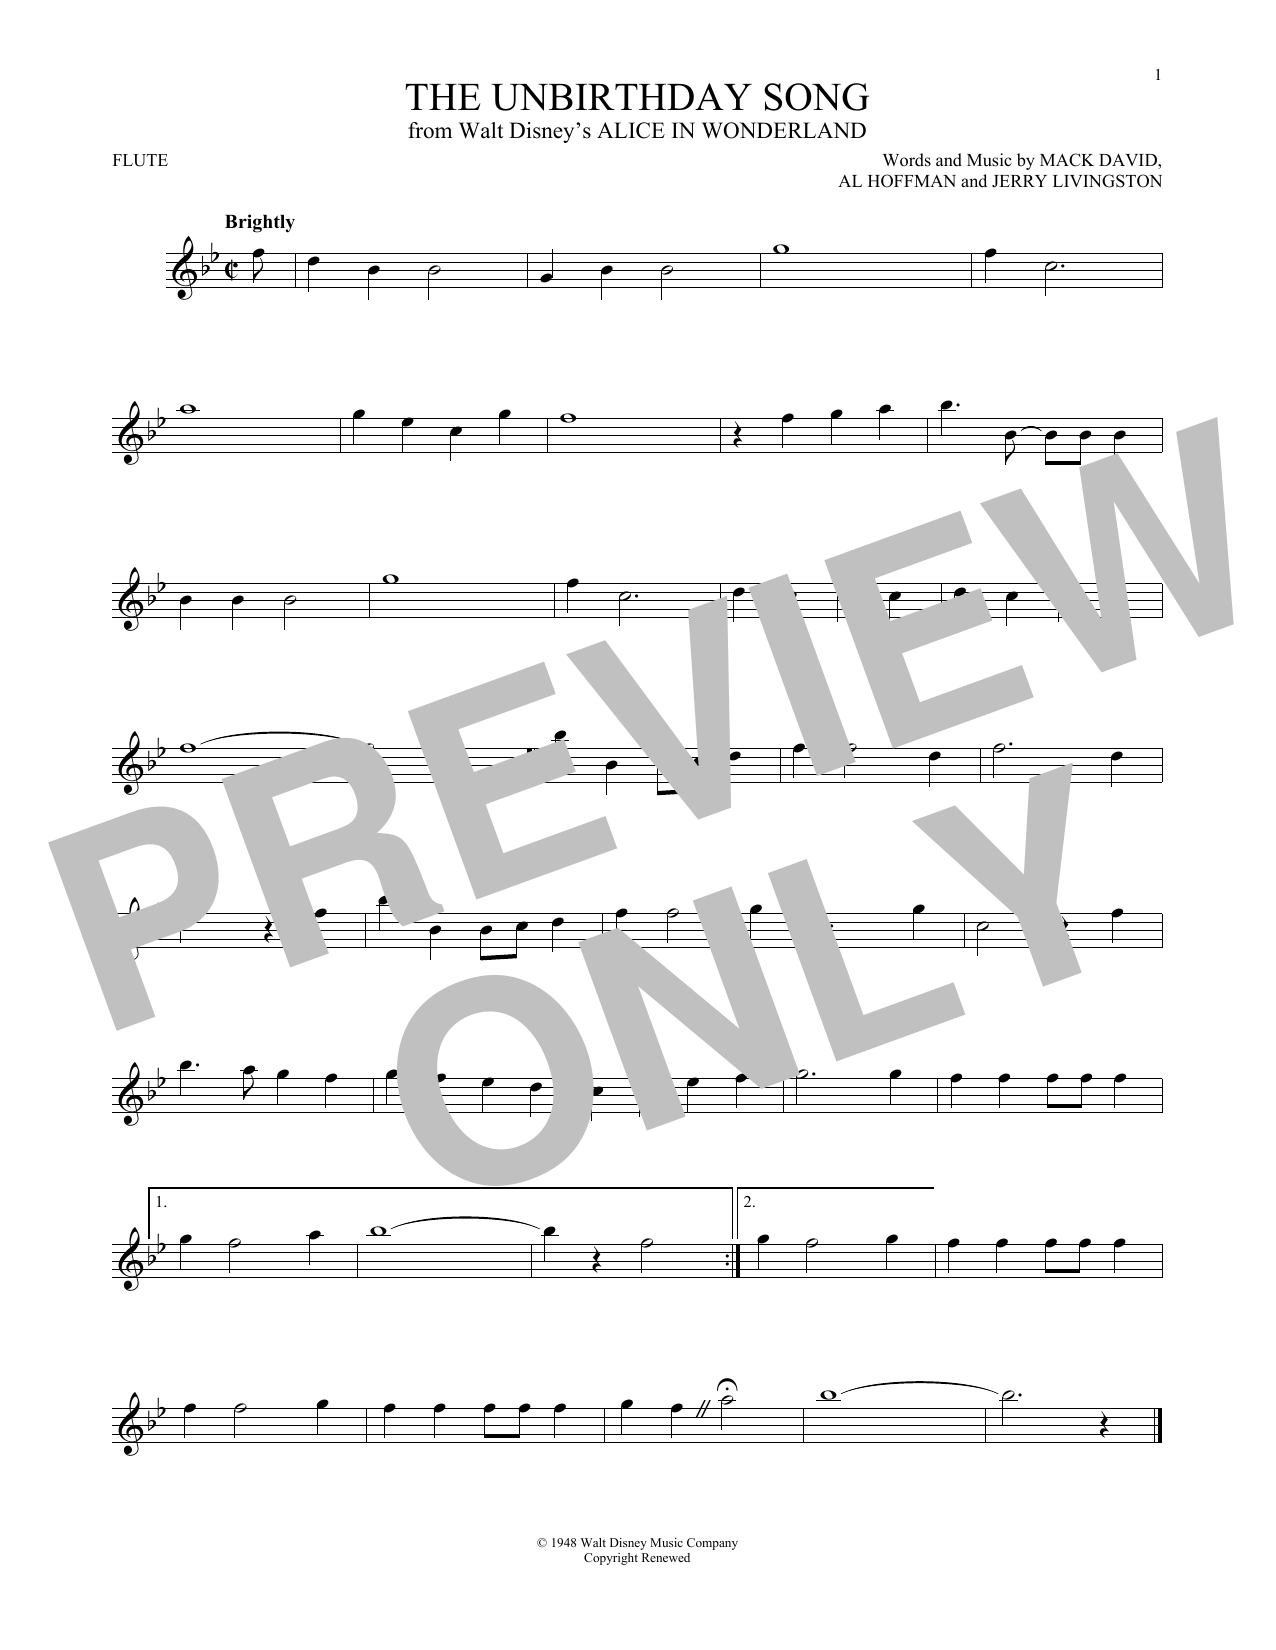 Download Mack David, Al Hoffman and Jerry Liv The Unbirthday Song (from Disney's Alic Sheet Music